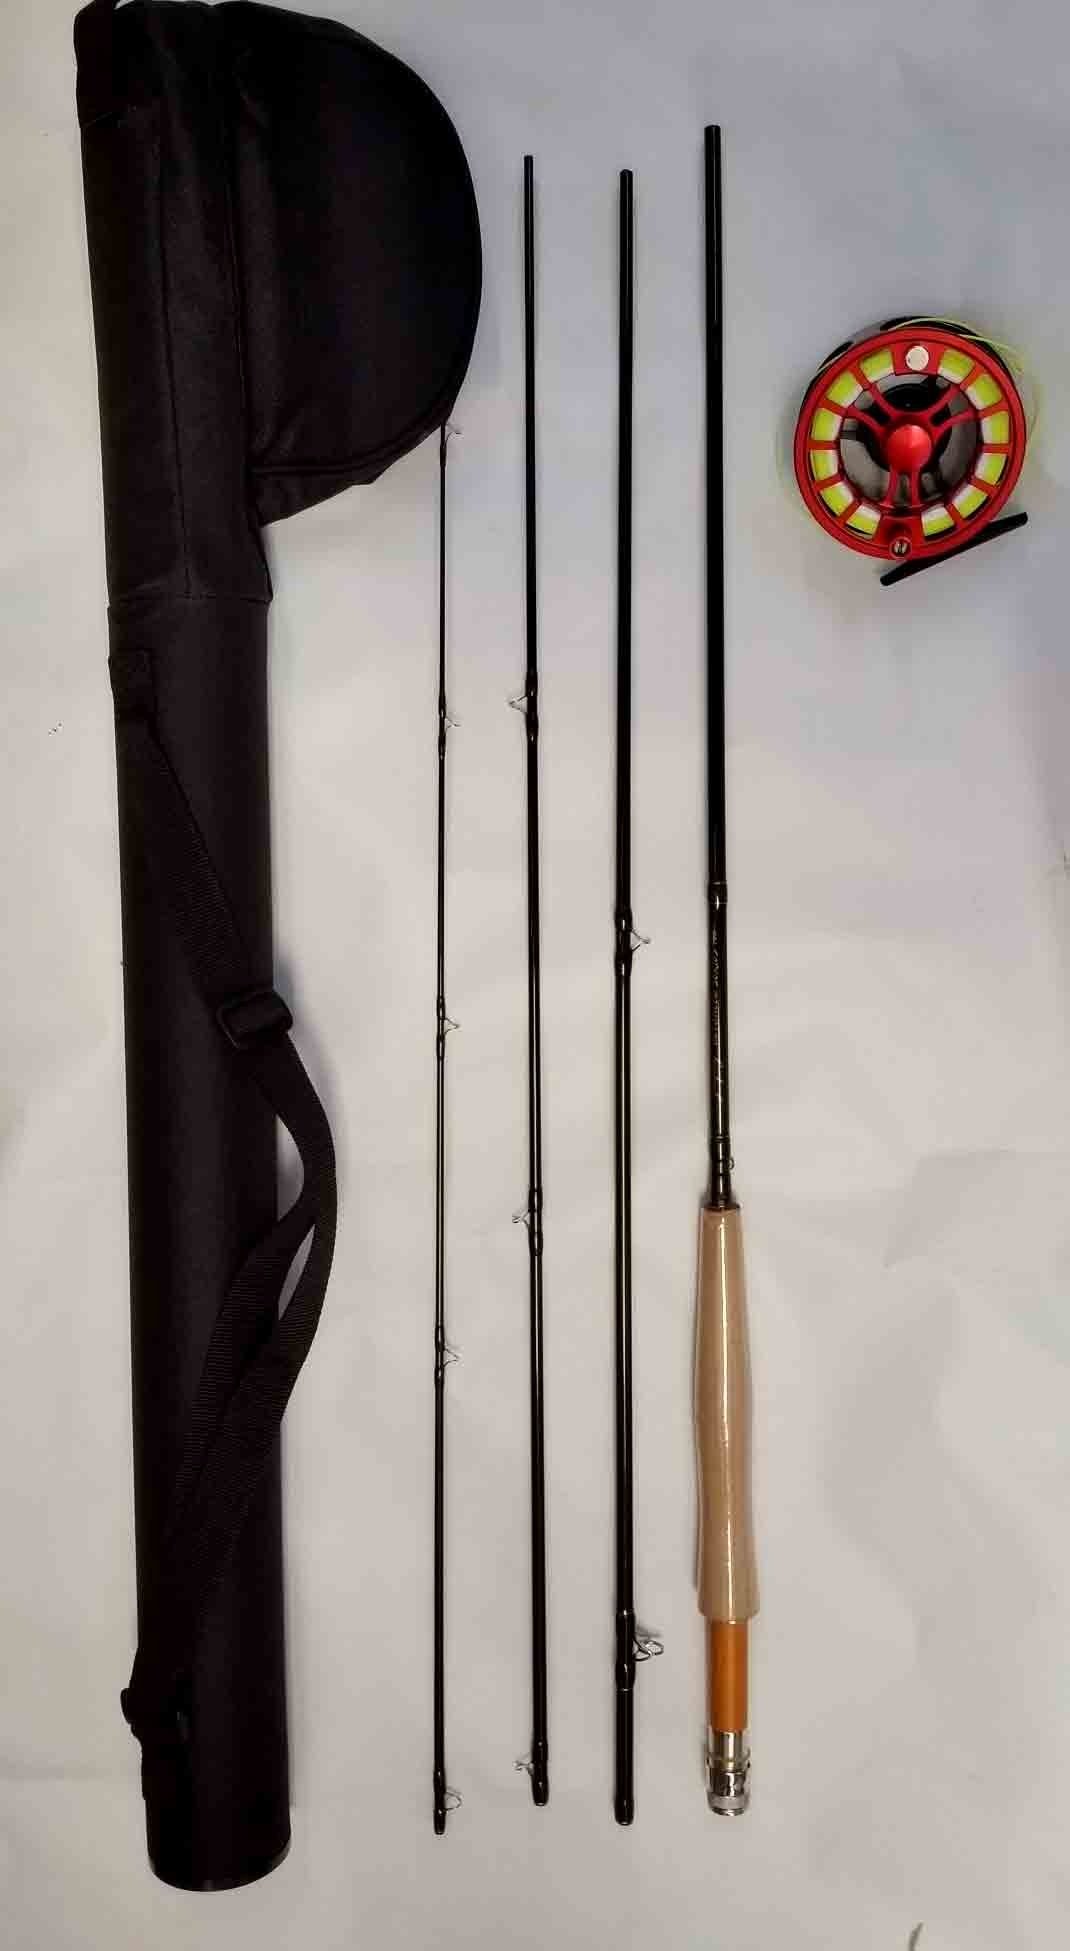 Advanced 9'0" 5wt Fly Combo With Cutthroat Reel, Line, and Case